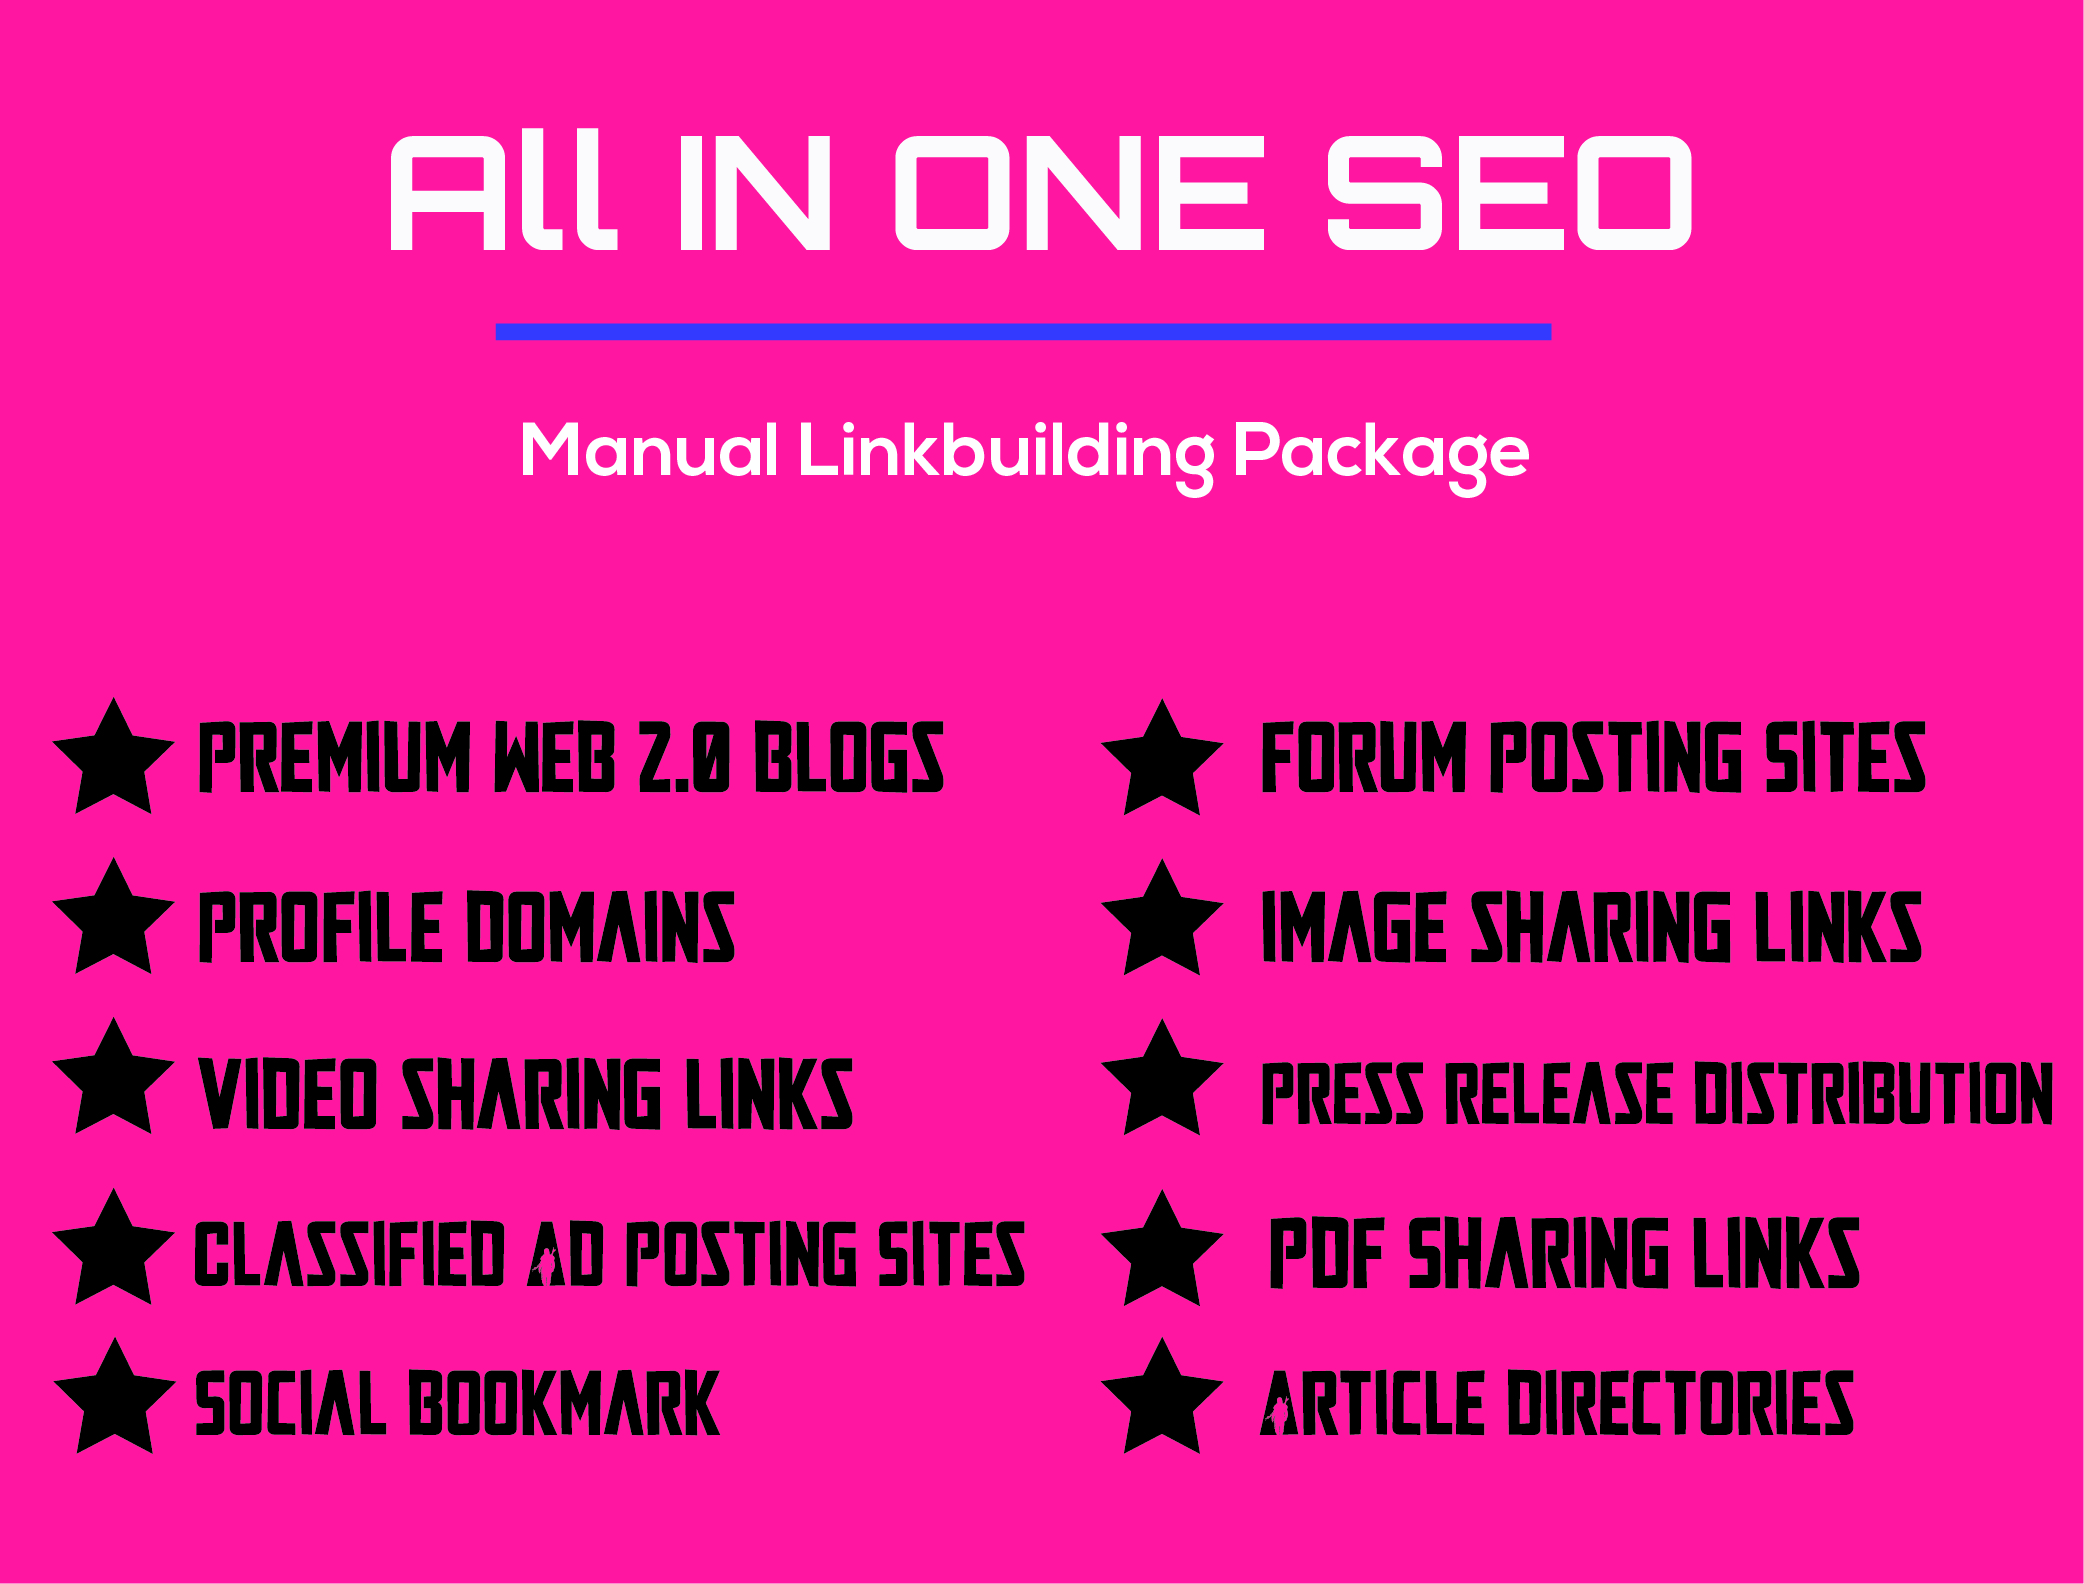 White Hat SEO 100 Backlinks, All In One SEO Manual Link-Building Service